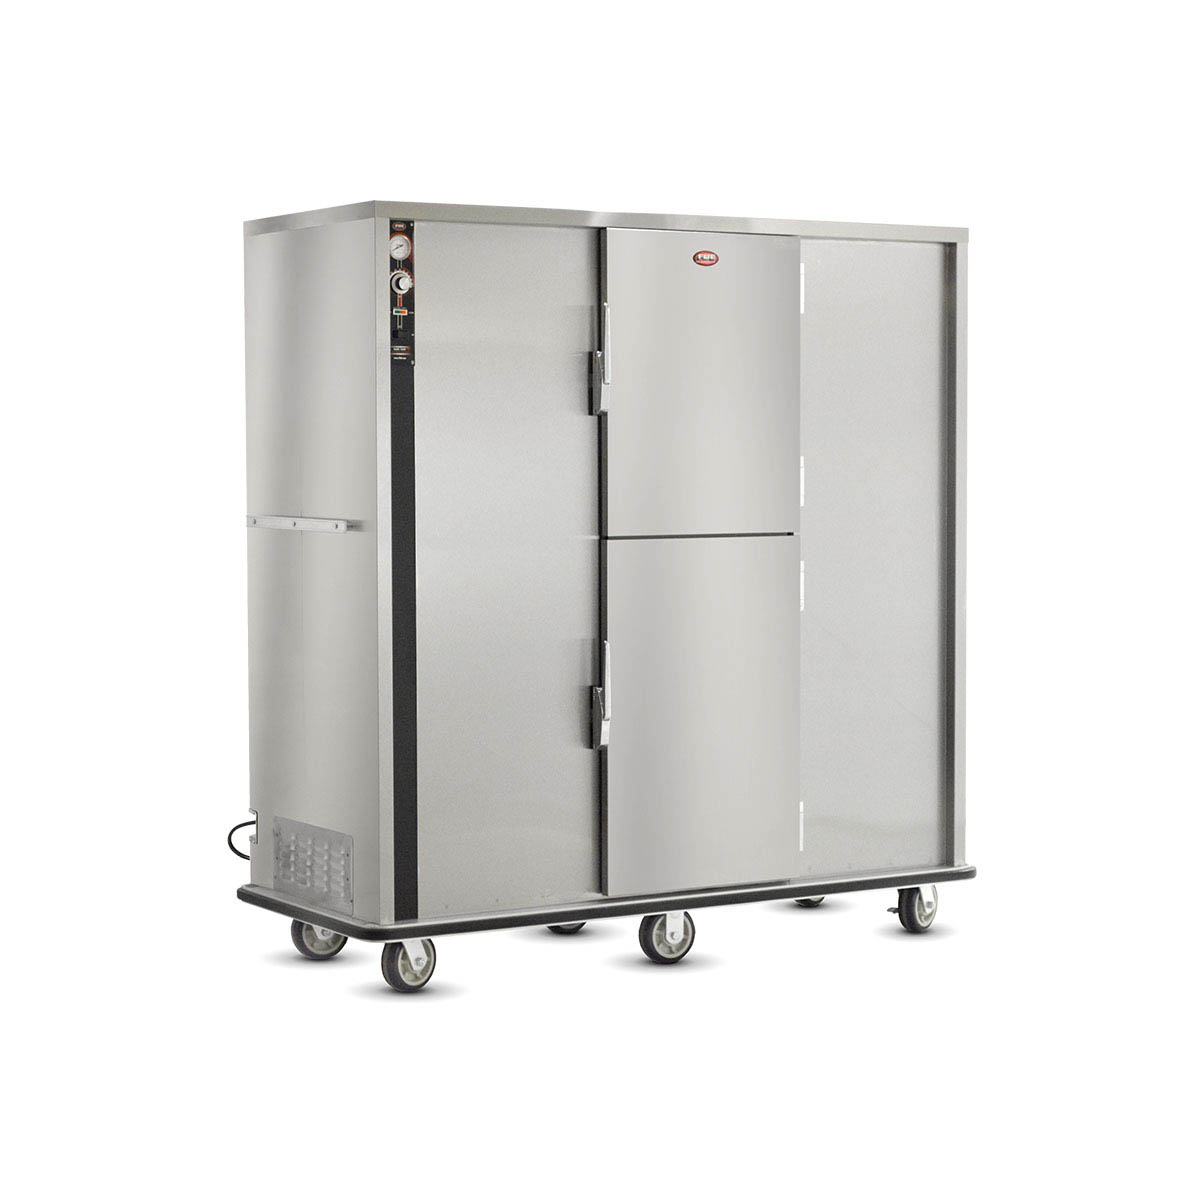 FWE P-200-XL Heated Banquet Cabinet, 160-200 Plates